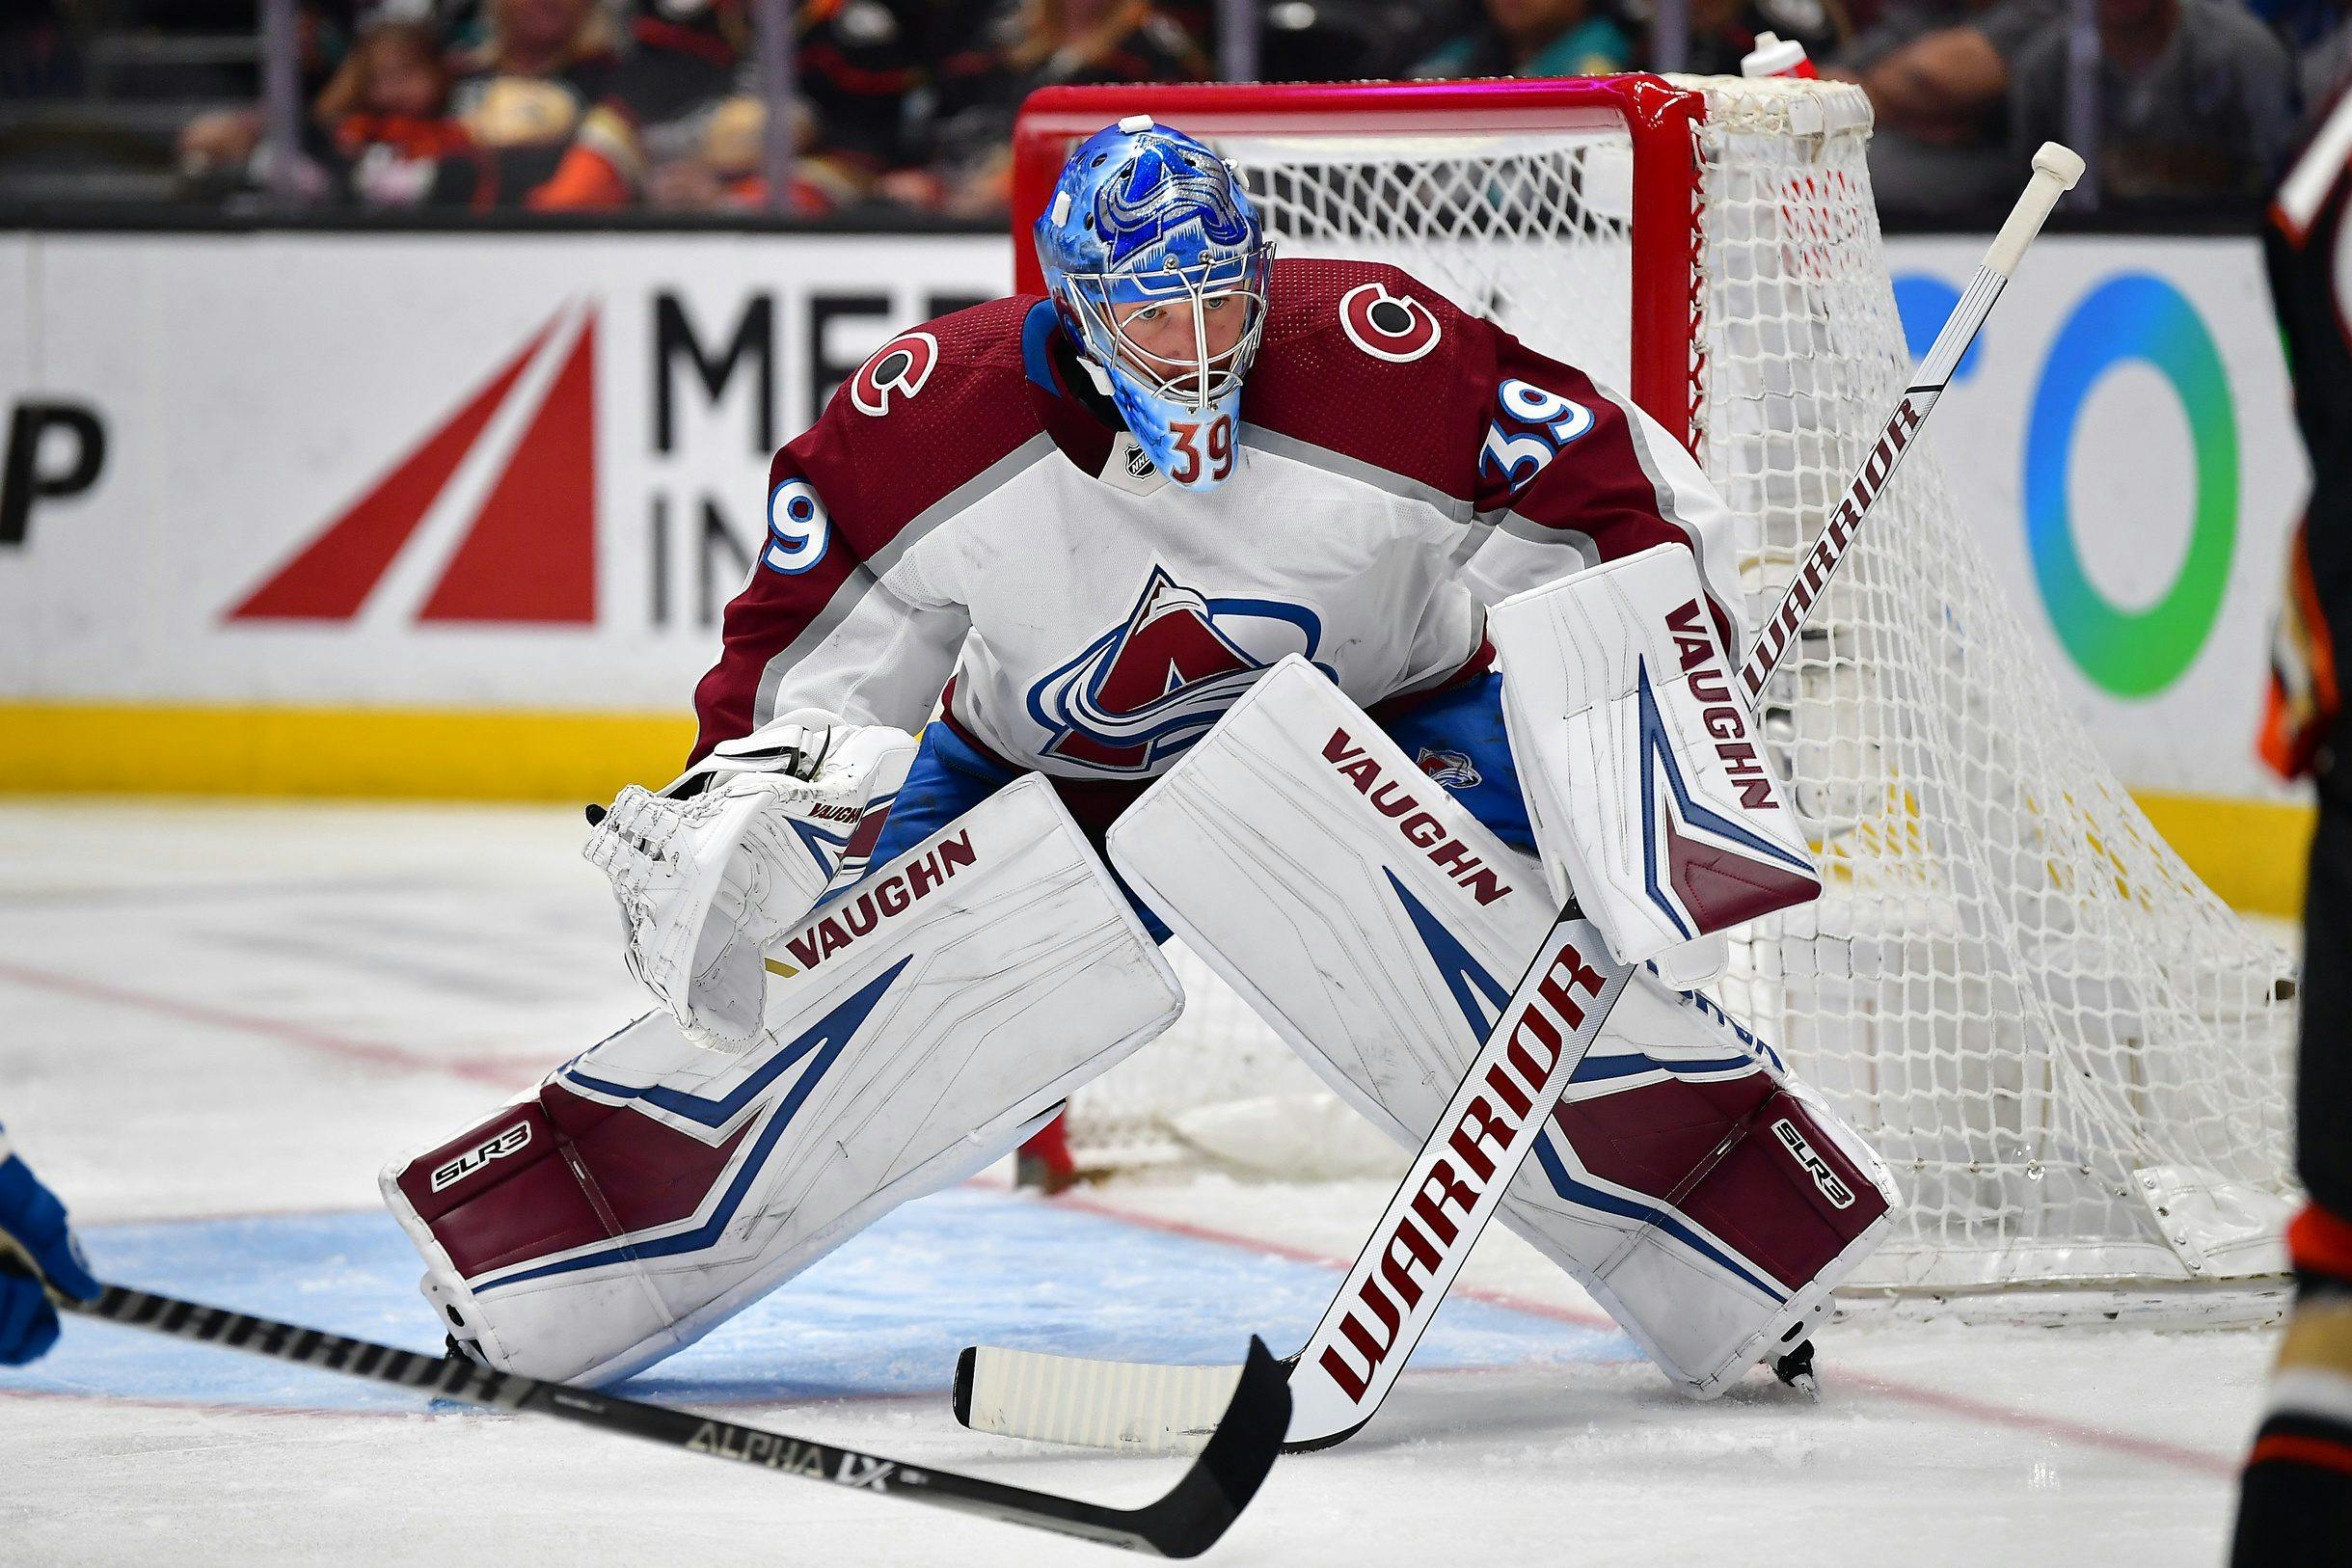 Avalanche goalie Pavel Francouz out for the season with lower-body injury